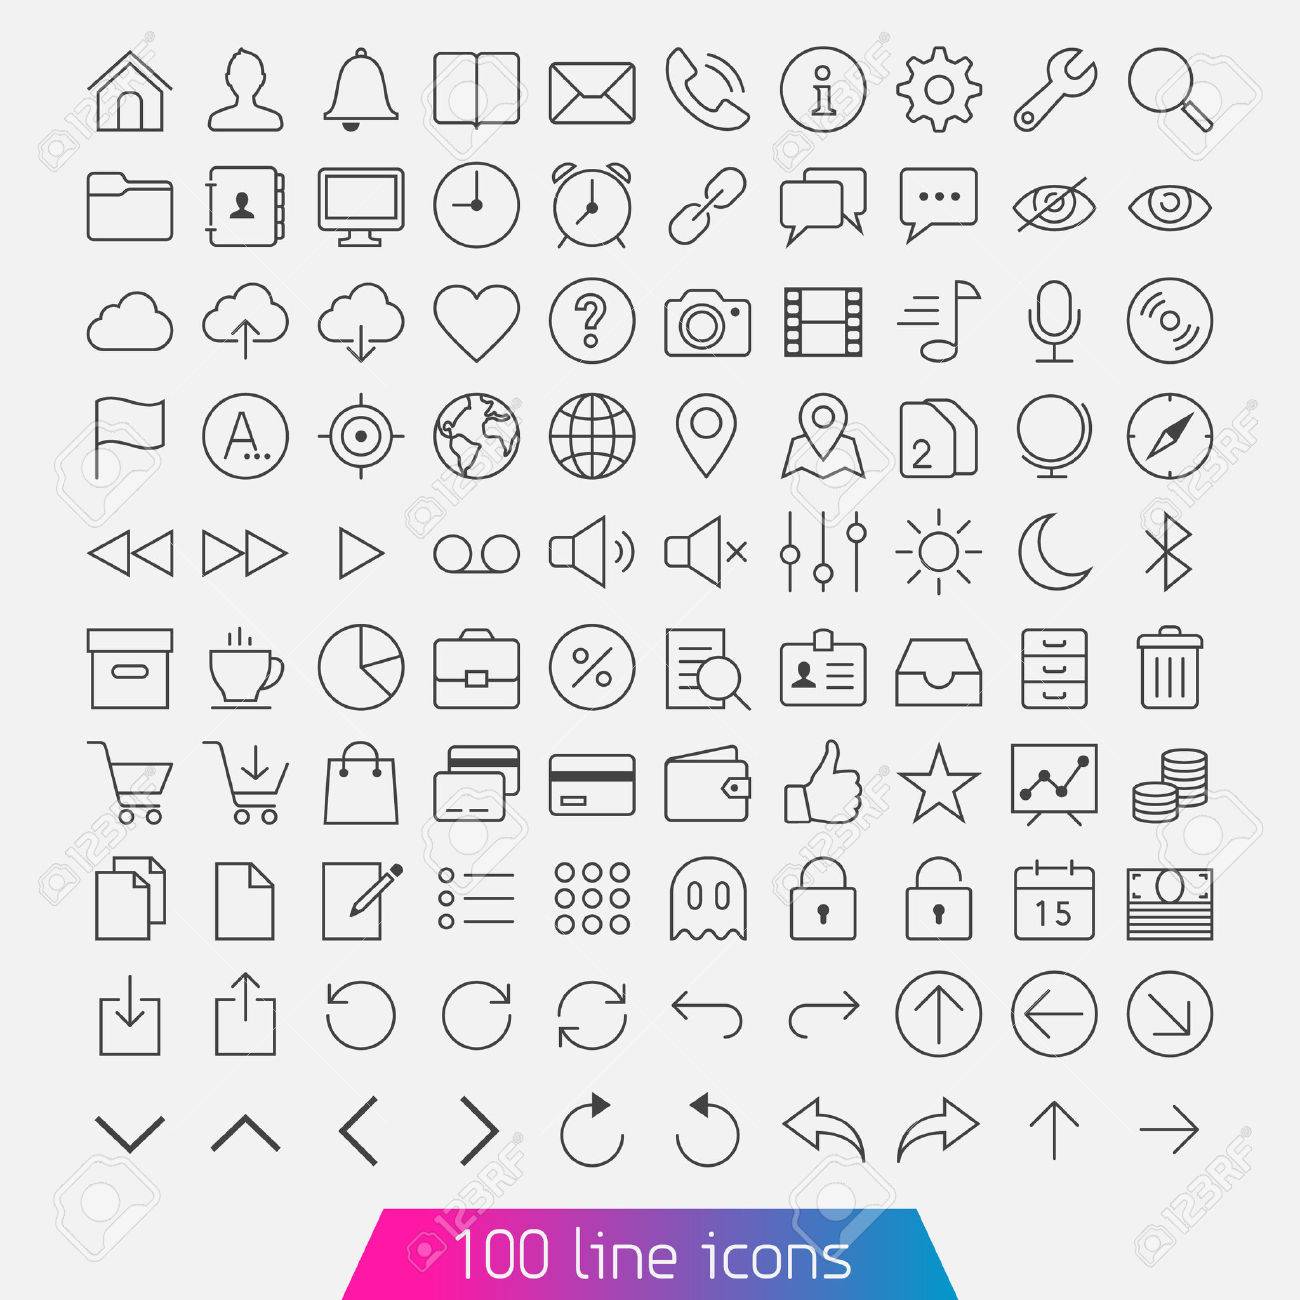 Free iOS7 style Outline Icons